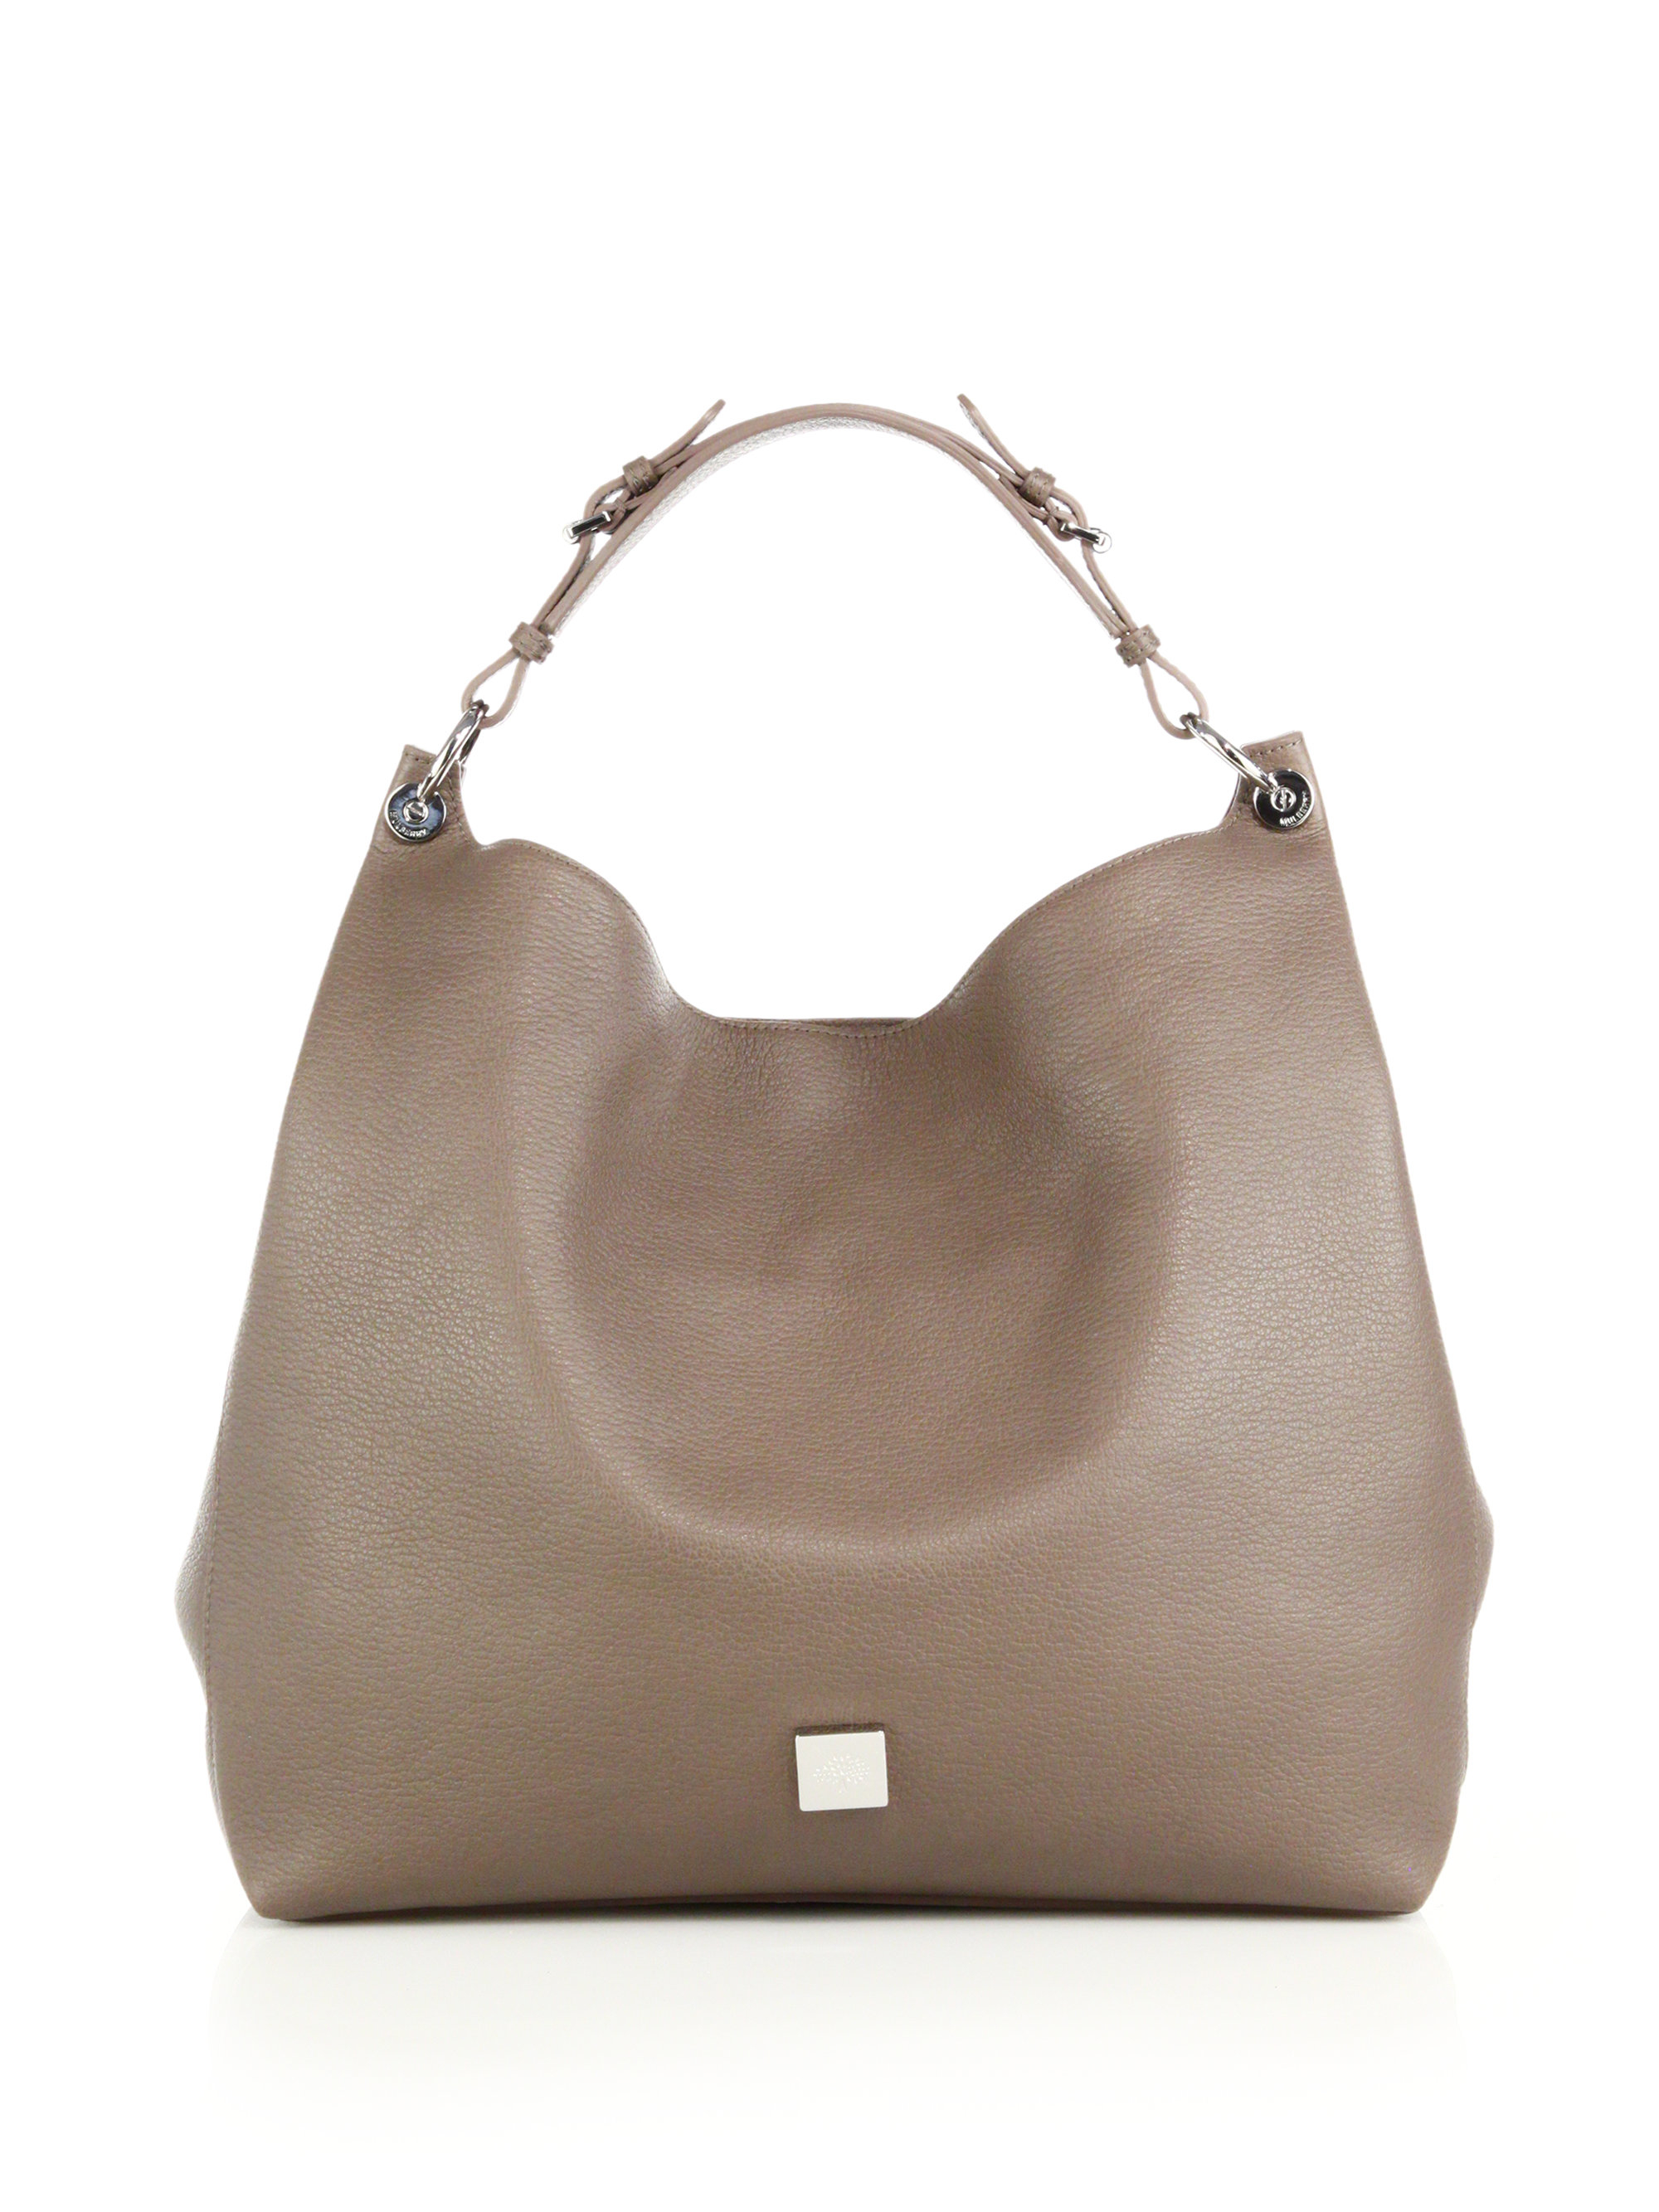 Lyst - Mulberry Freya Leather Hobo Bag in Gray